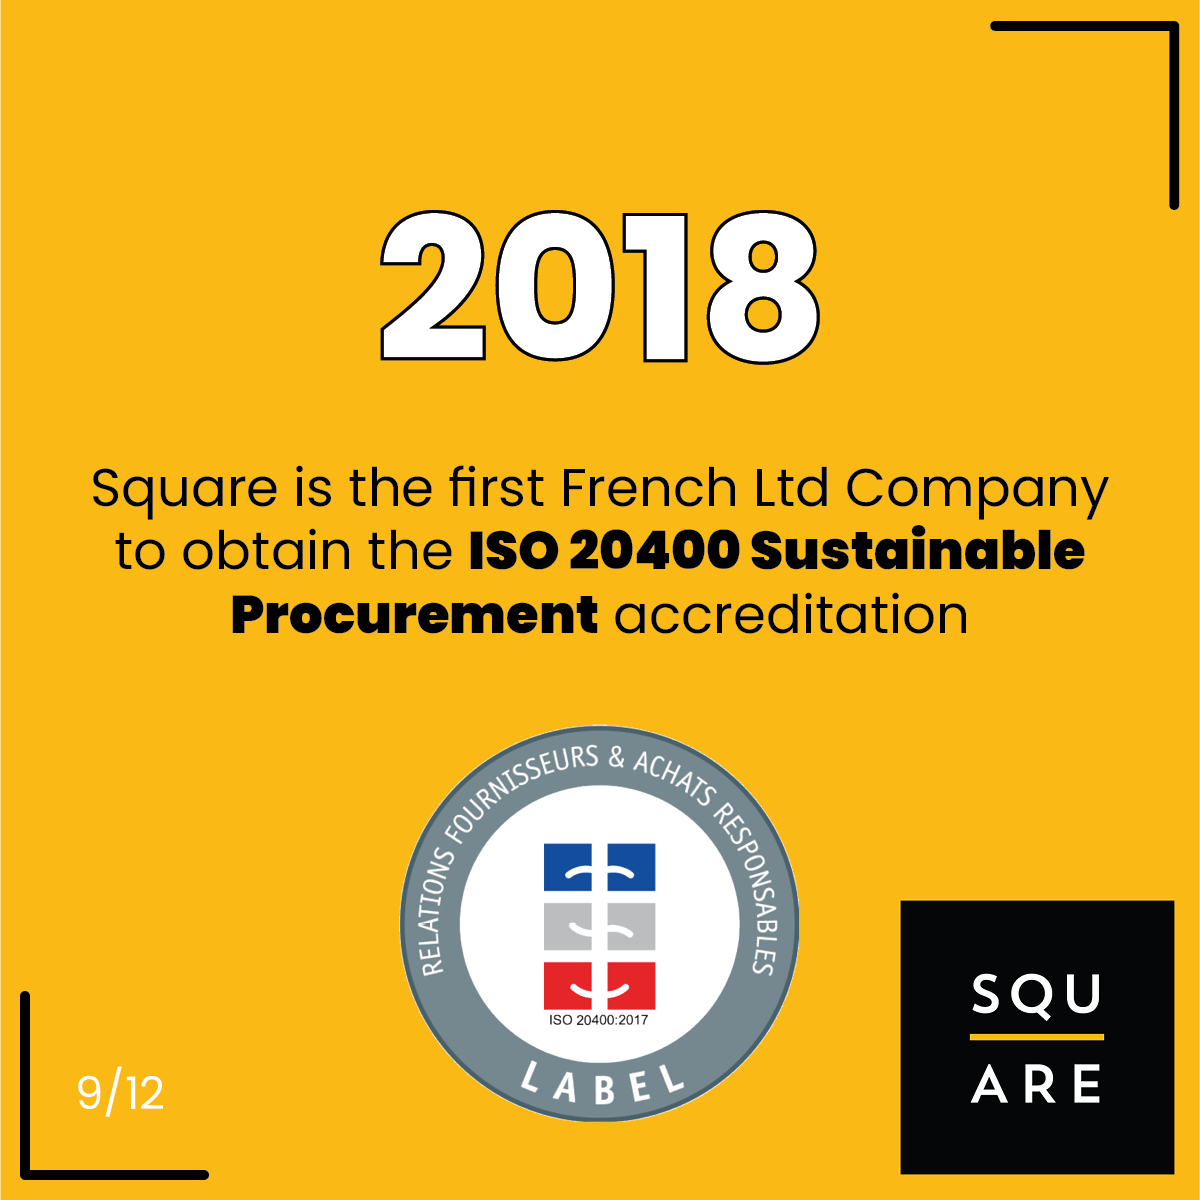 2018, Square is the first French Ltd Company to obtain the ISO 20400 Sustainable Procurement accreditation